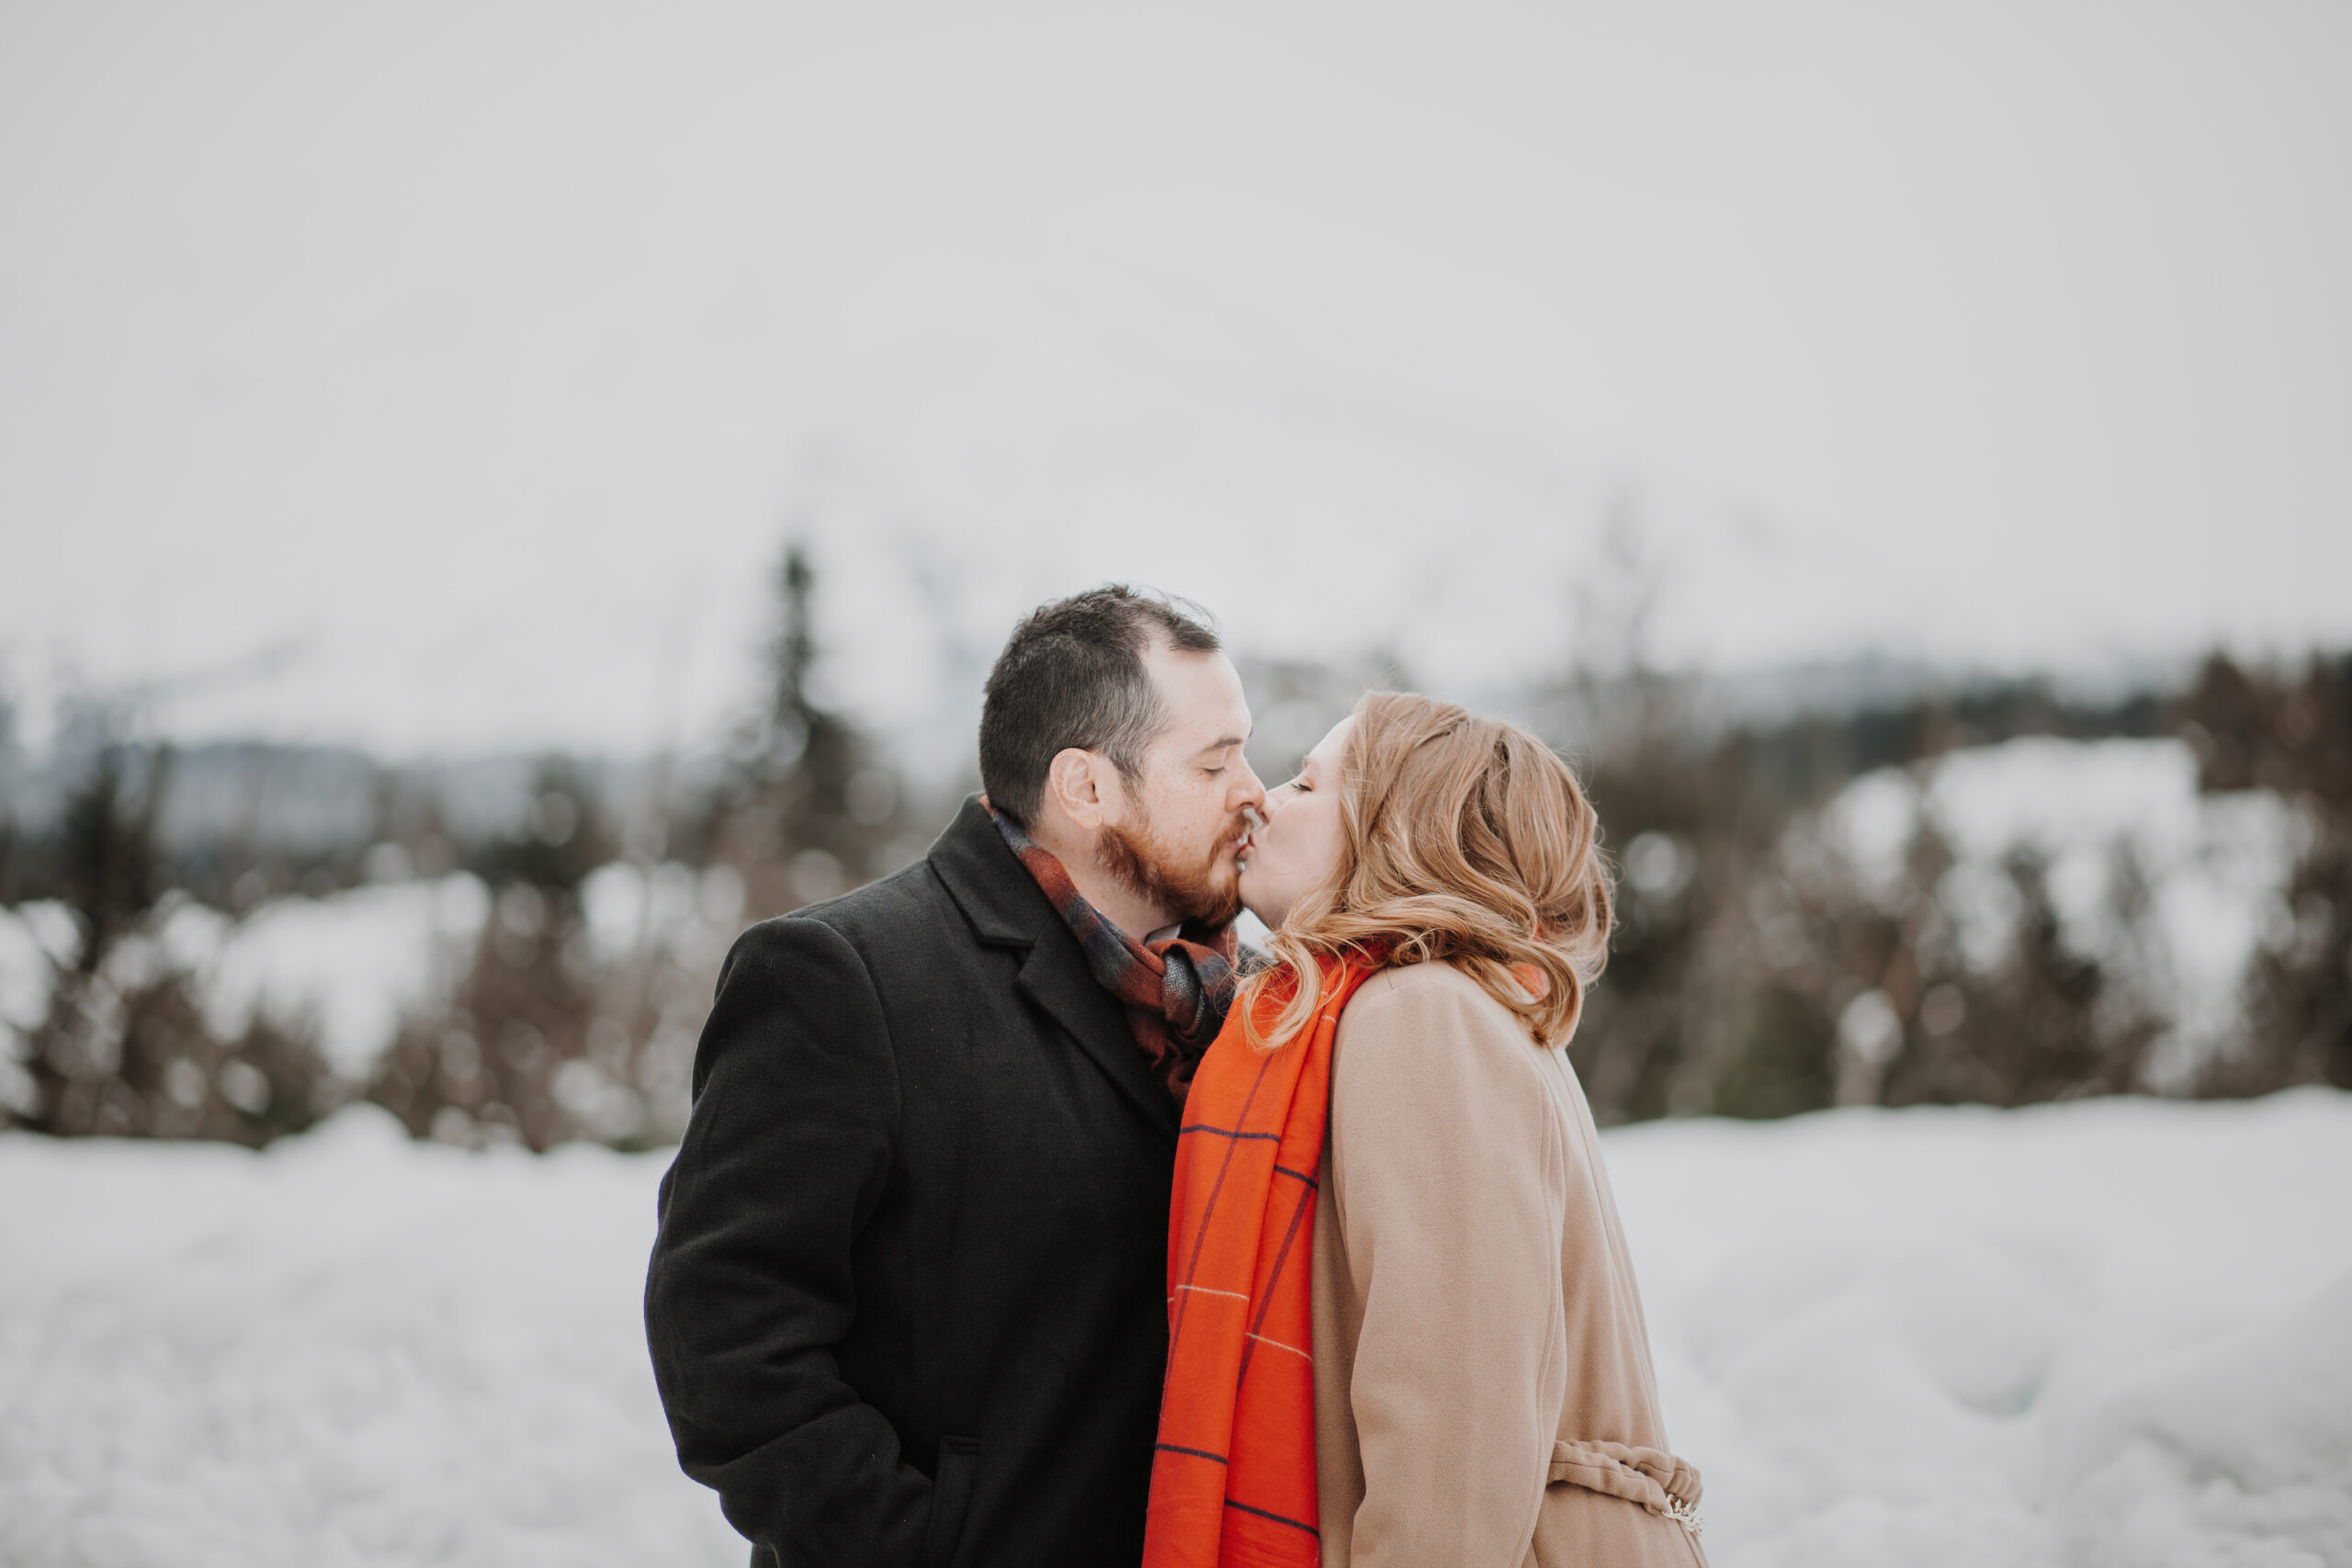 snowy engagement session up at mt. st. helens with the mountain in the background